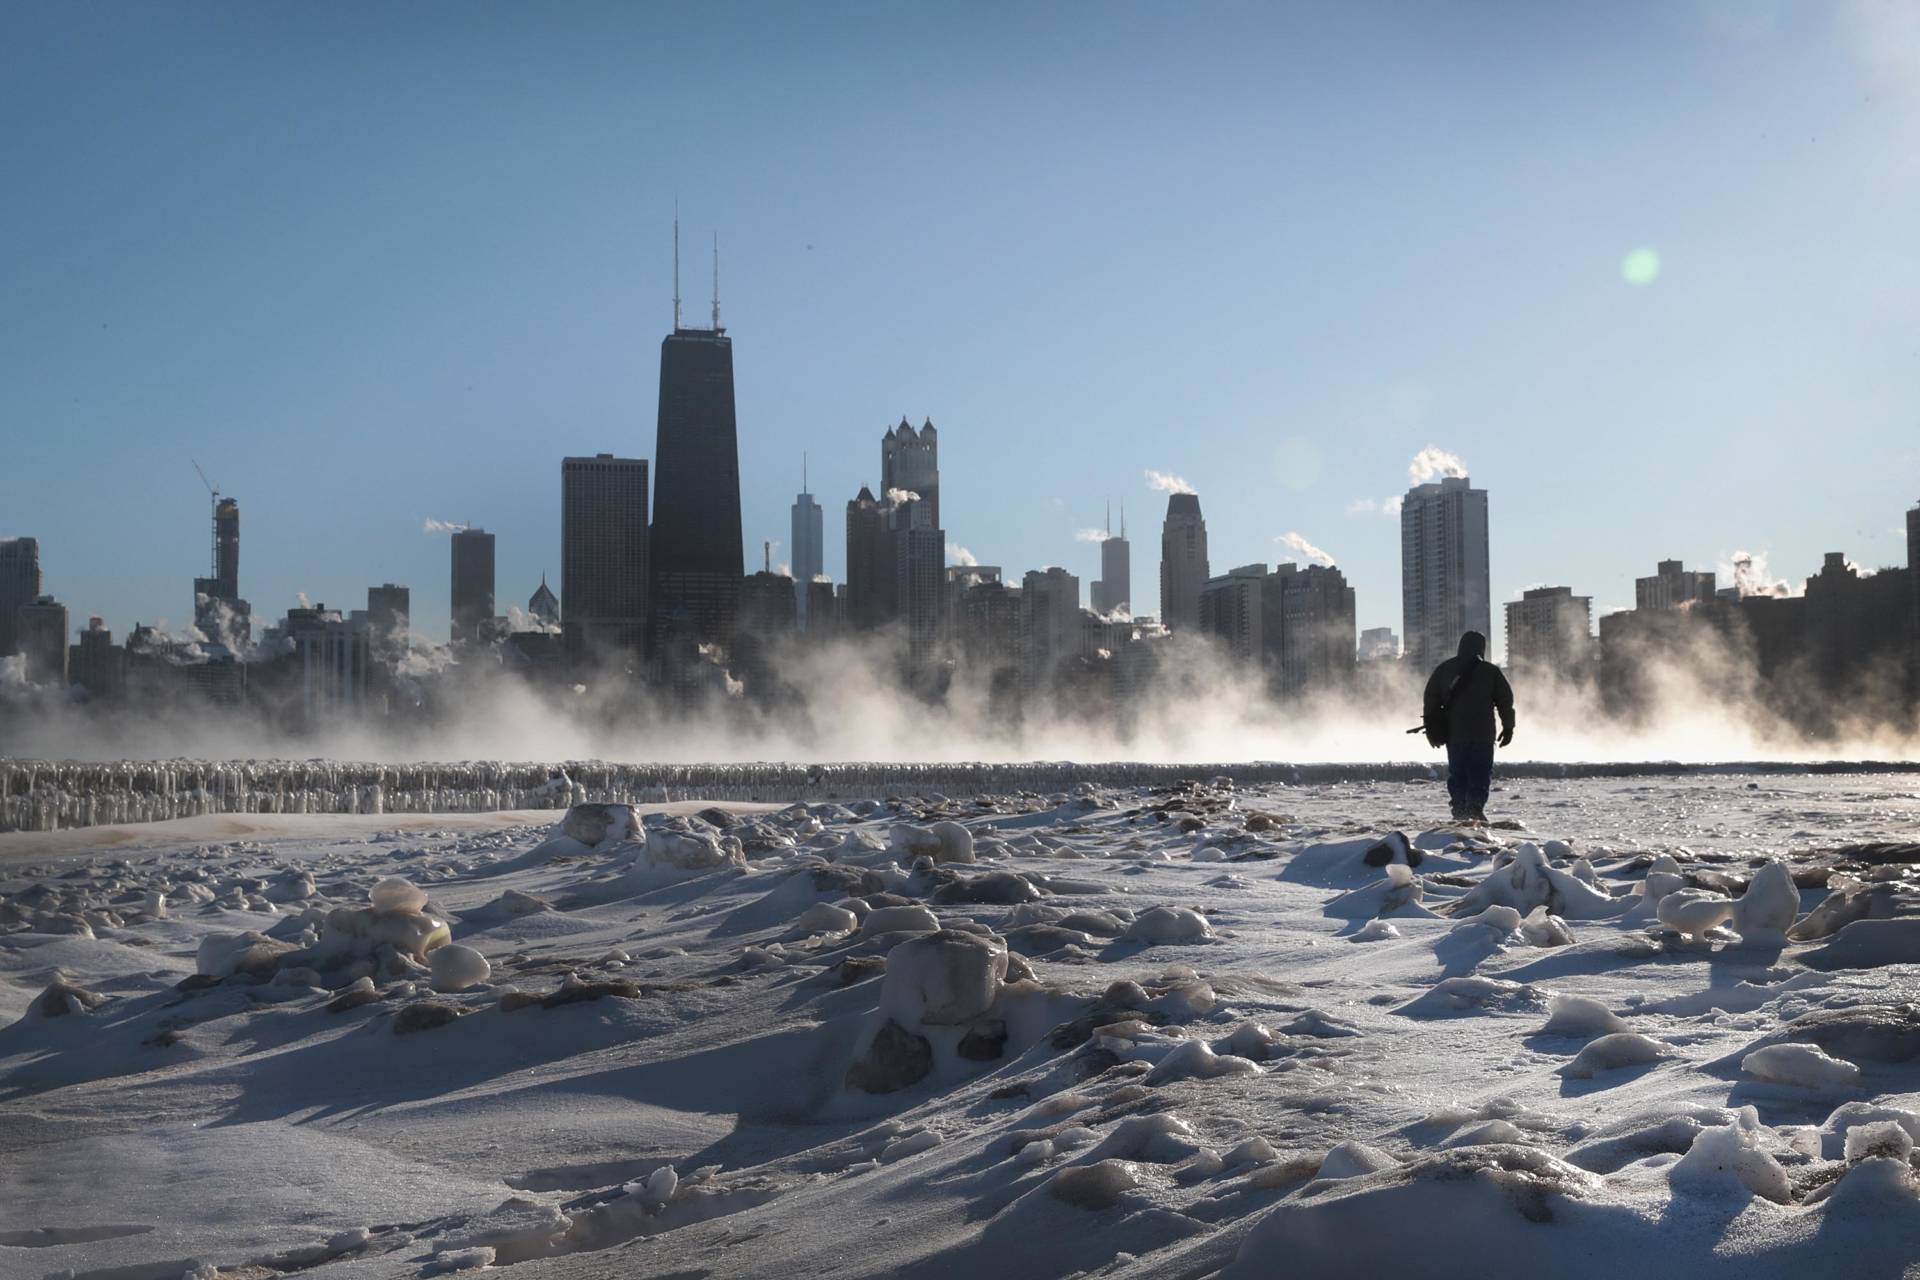 A man walks along the lakefront as temperatures hovered around -20 degrees on Jan. 30, 2019 in Chicago, Scott Olson/Getty Images